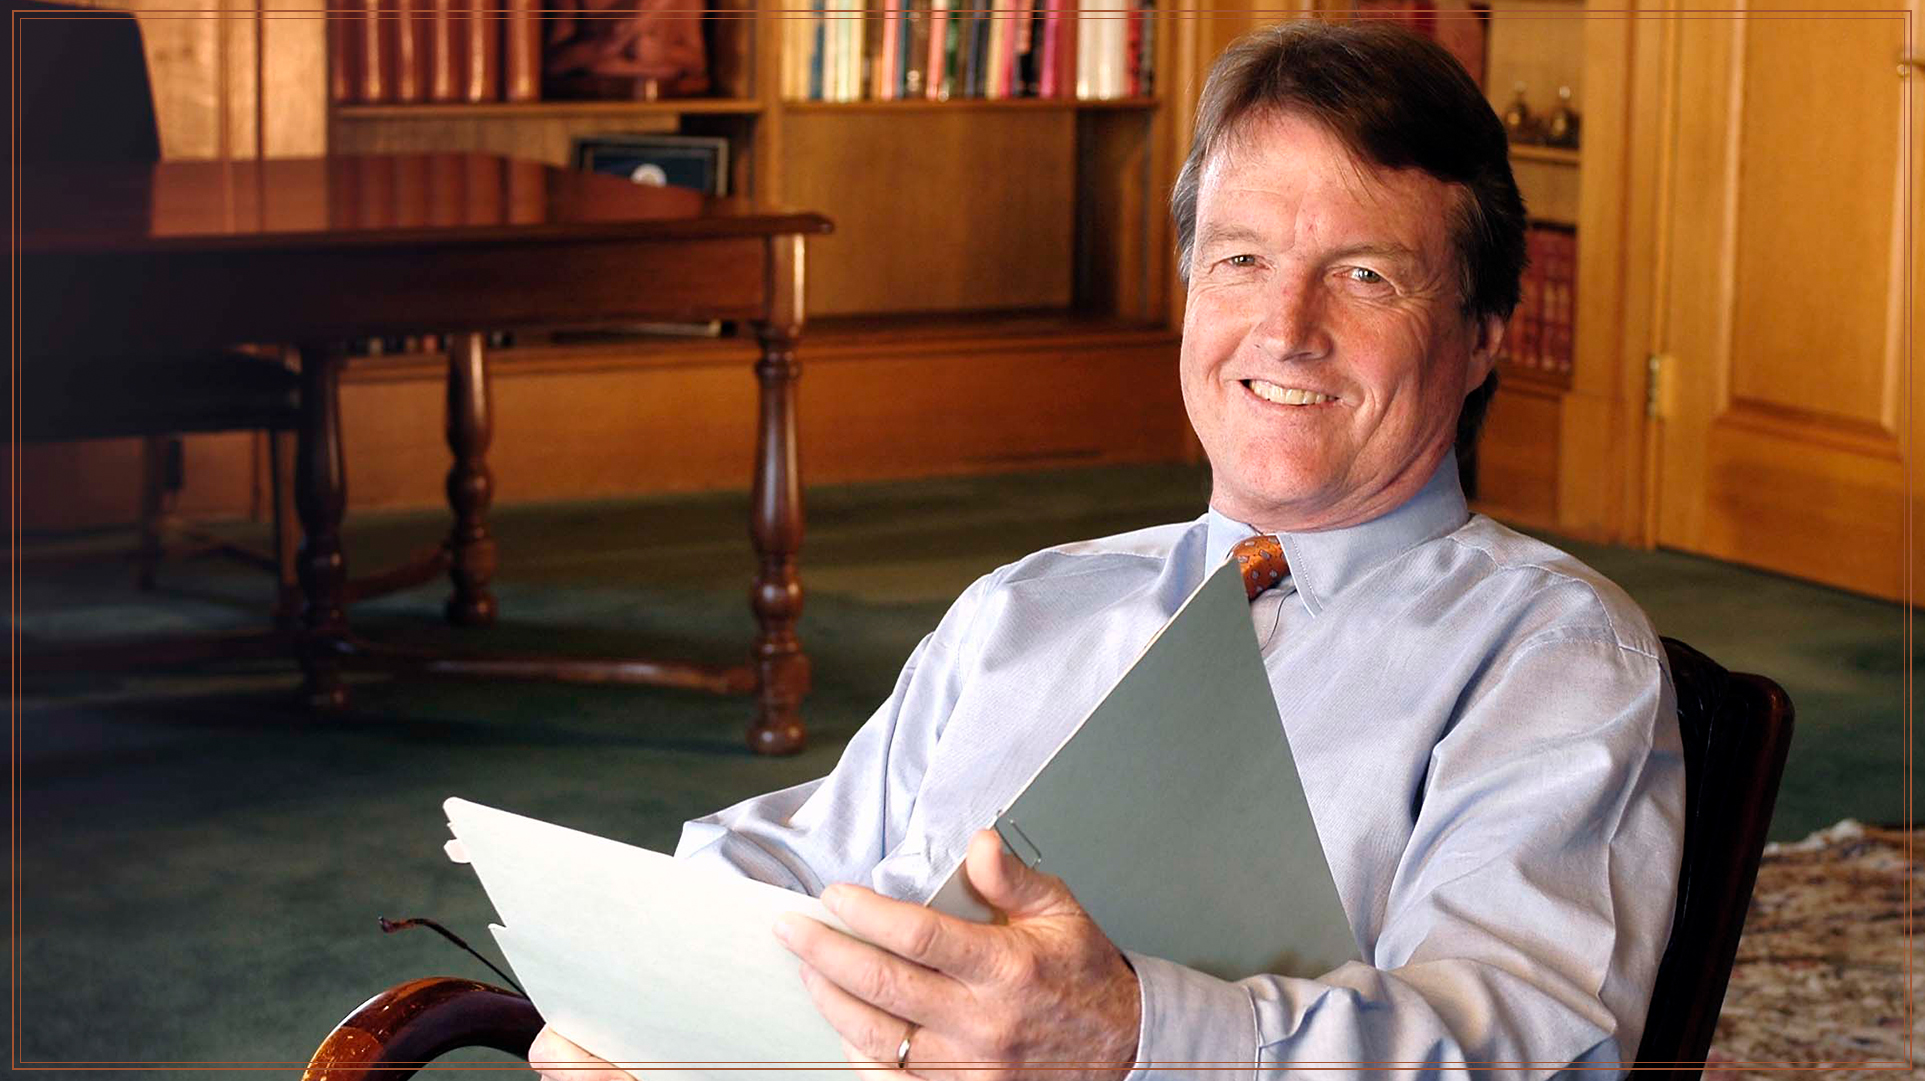 President Bill Powers smiling and opening a file in his office.